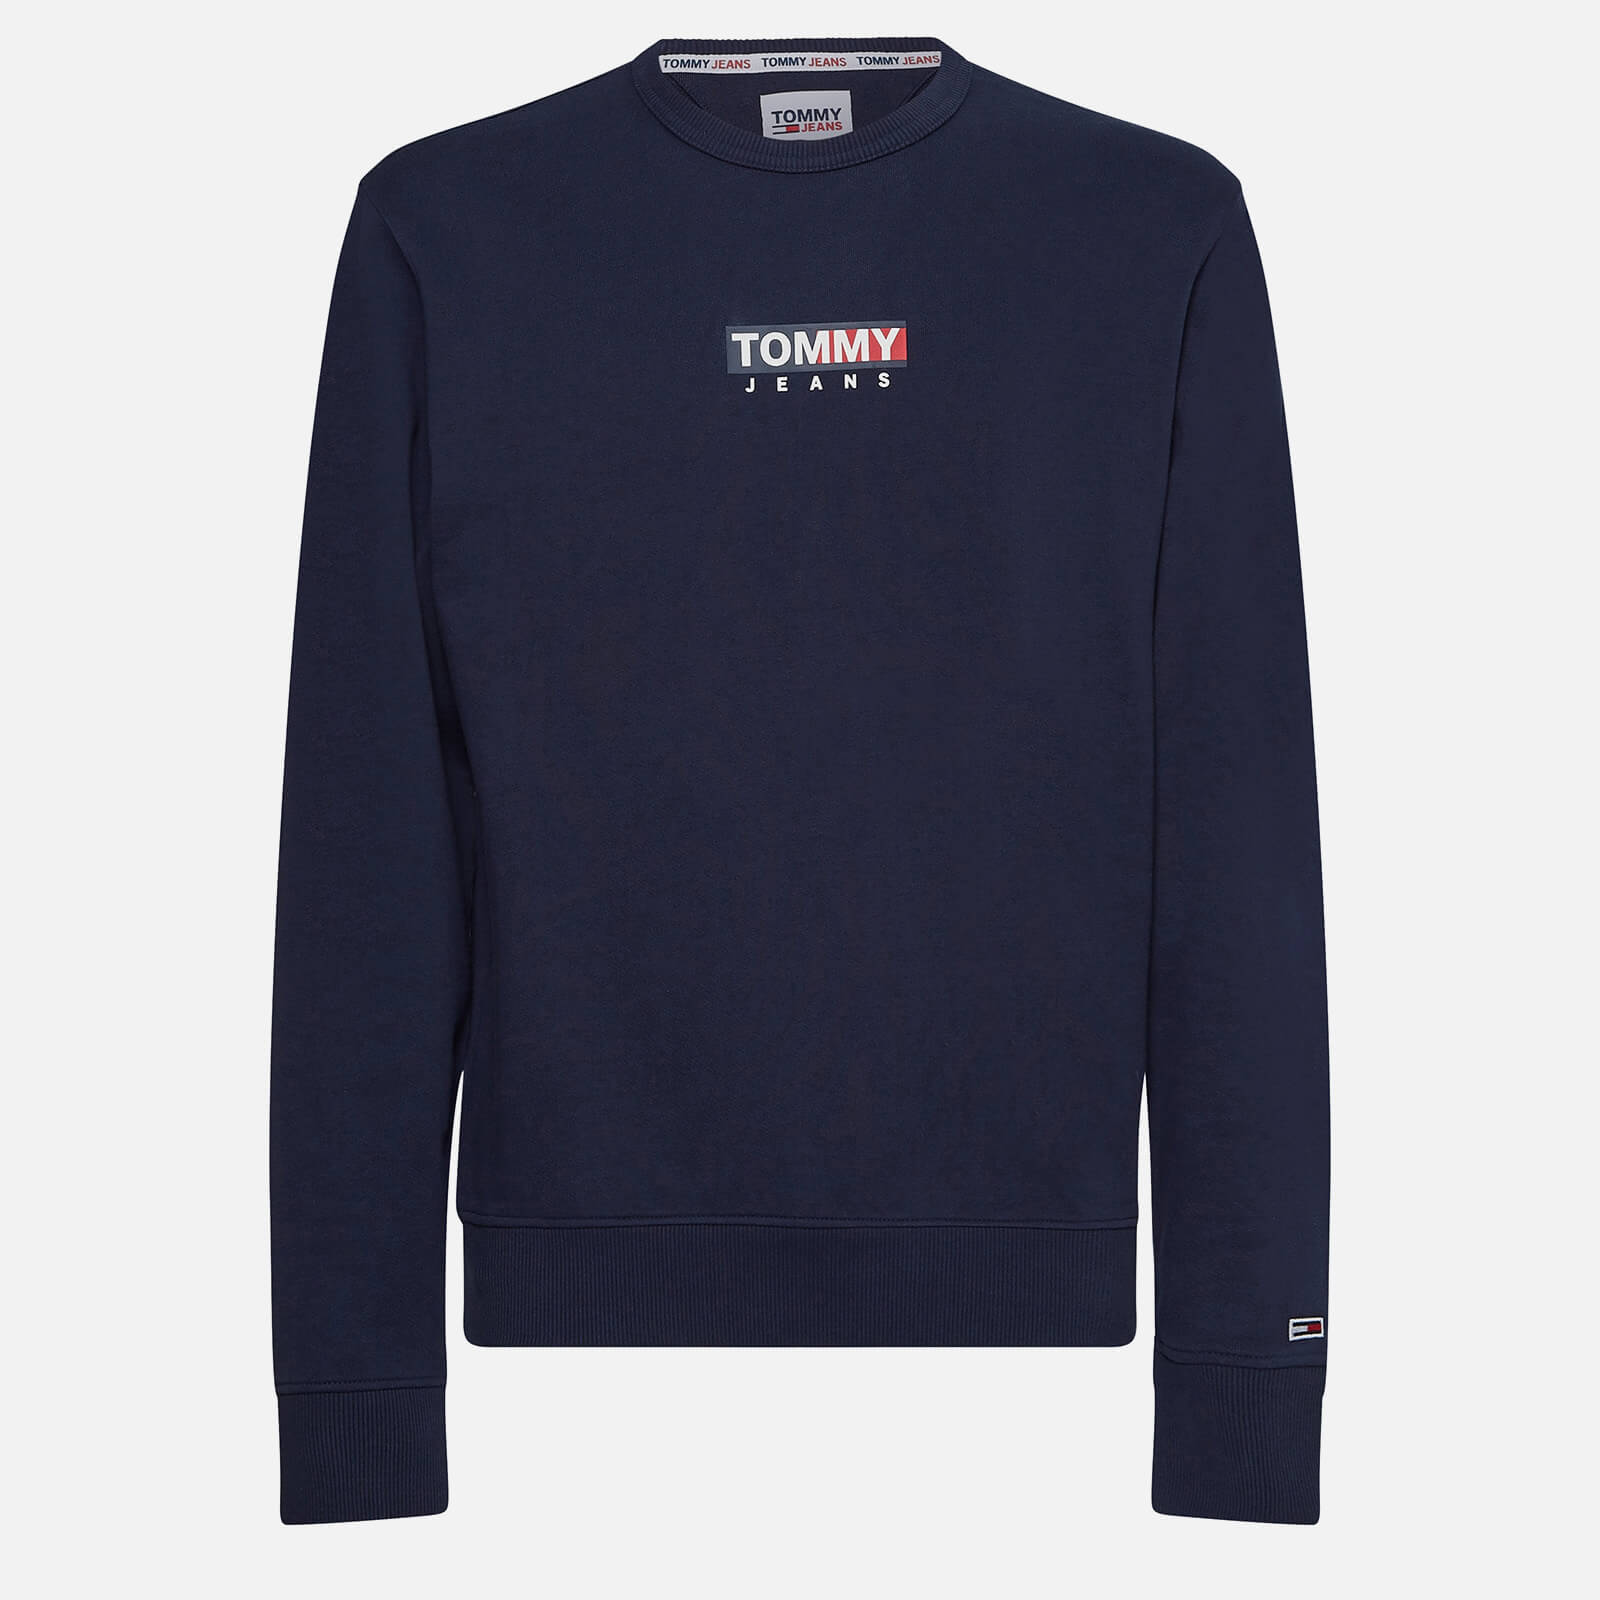 Tommy Jeans Men's Entry Graphic Sweatshirt - Twilight Navy